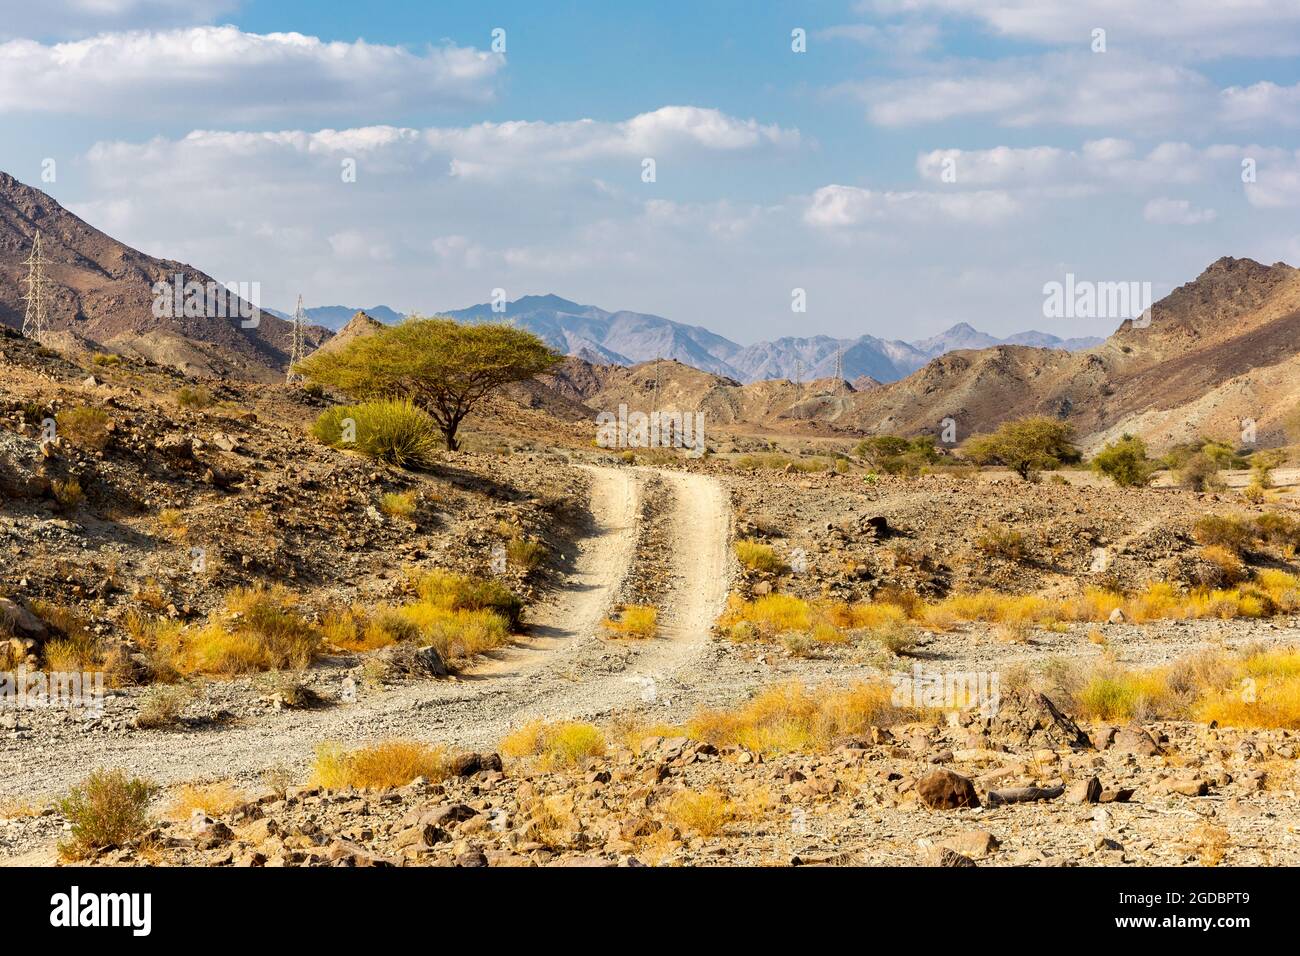 Copper Hike trail, winding gravel dirt road through Wadi Ghargur riverbed and rocky limestone Hajar Mountains in Hatta, United Arab Emirates. Stock Photo